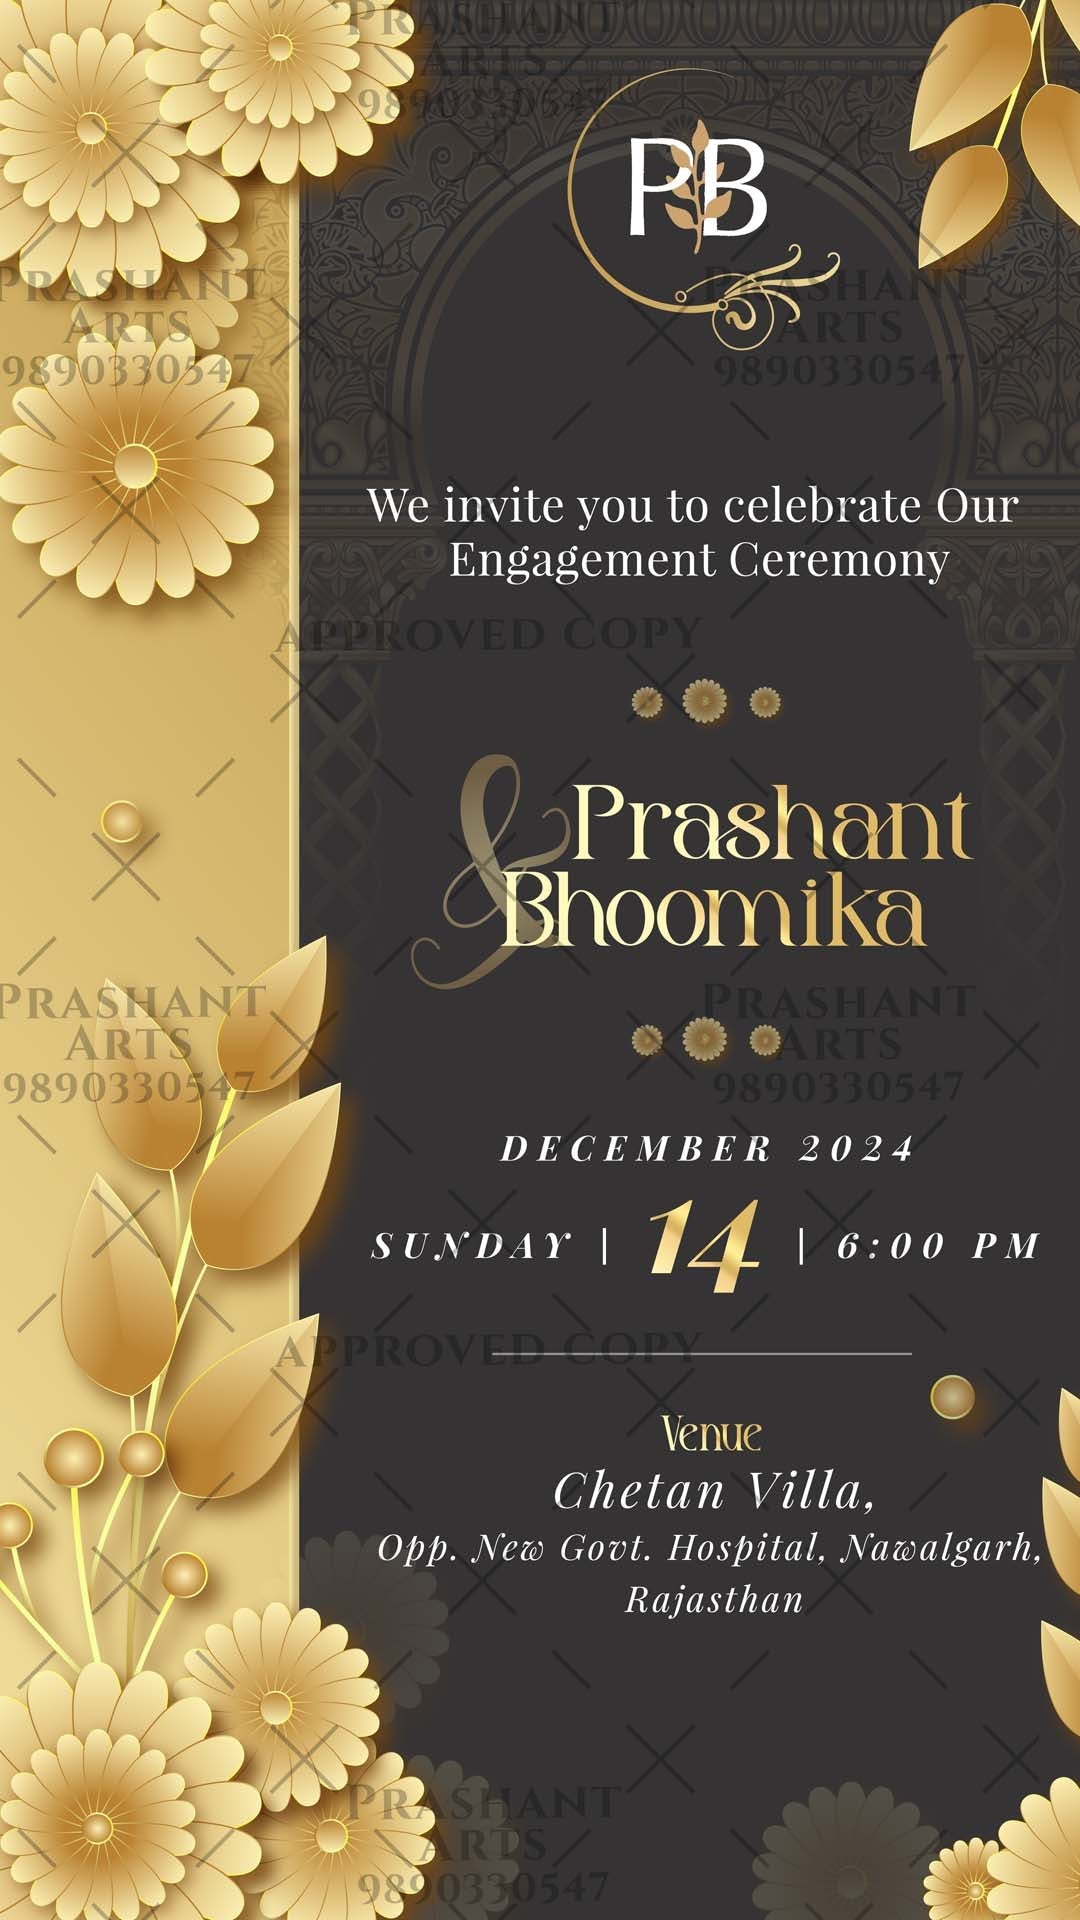 Affordable Engagement Invitations Online: Share the Love with Style | EG-005